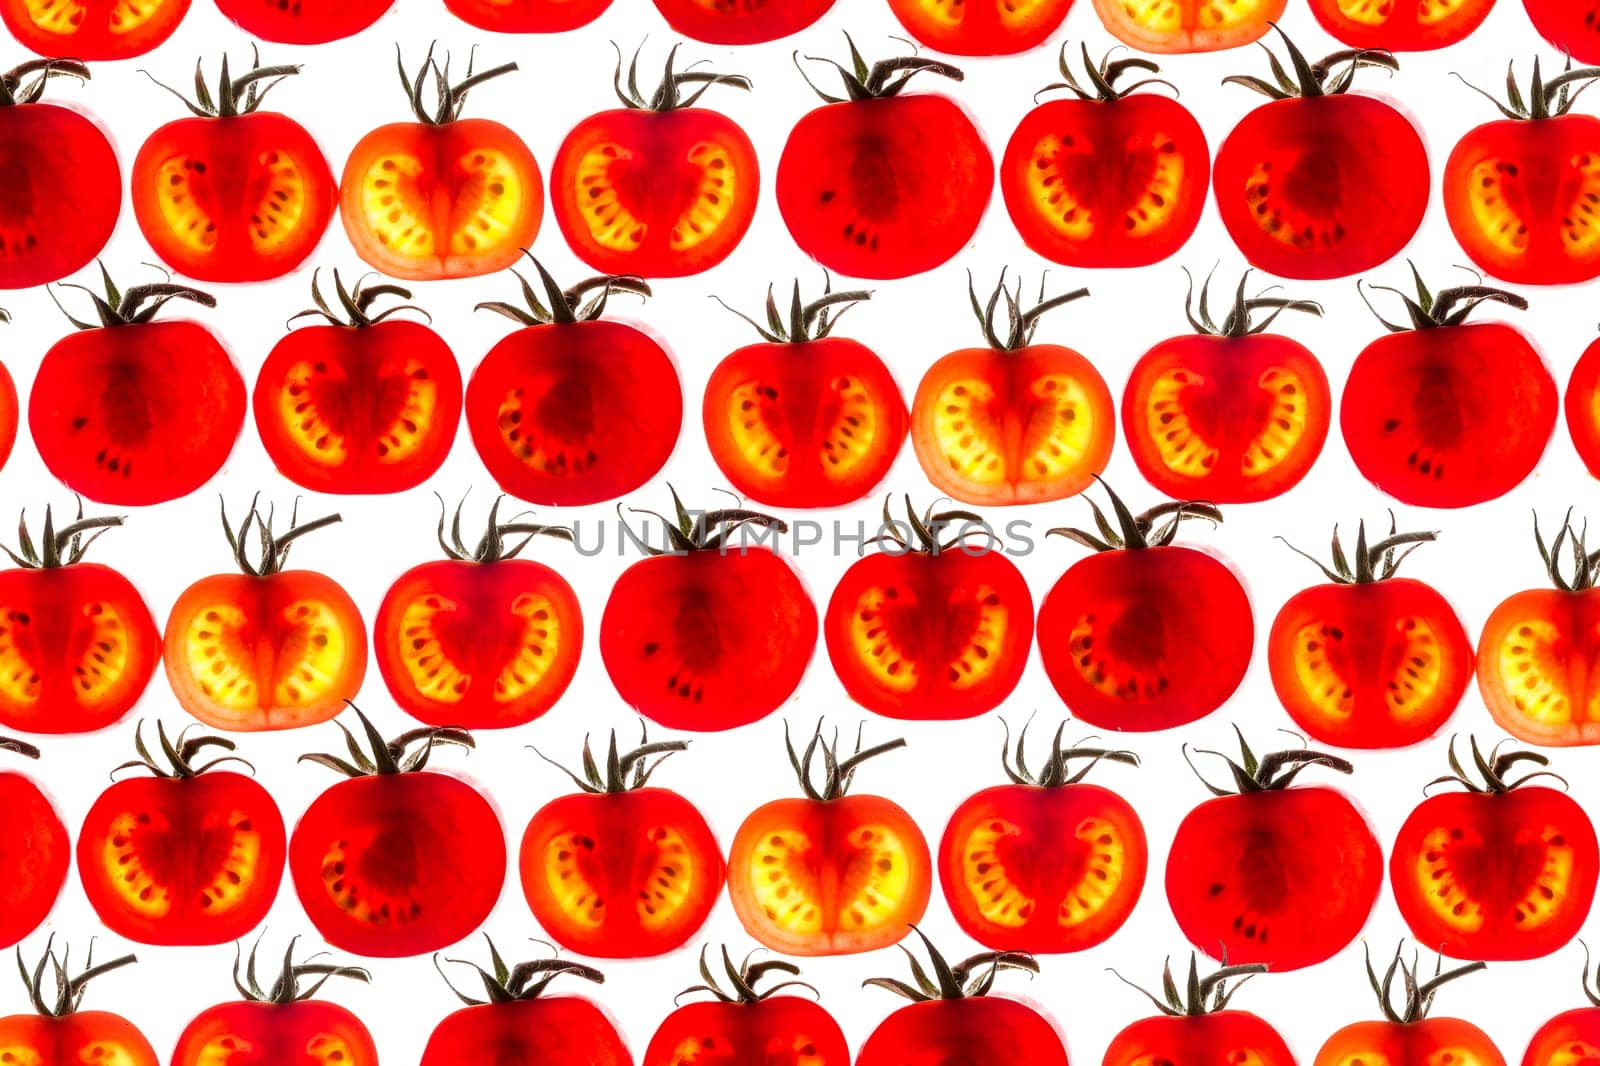 many tomato slice backlit showing intricate detail red green pattern